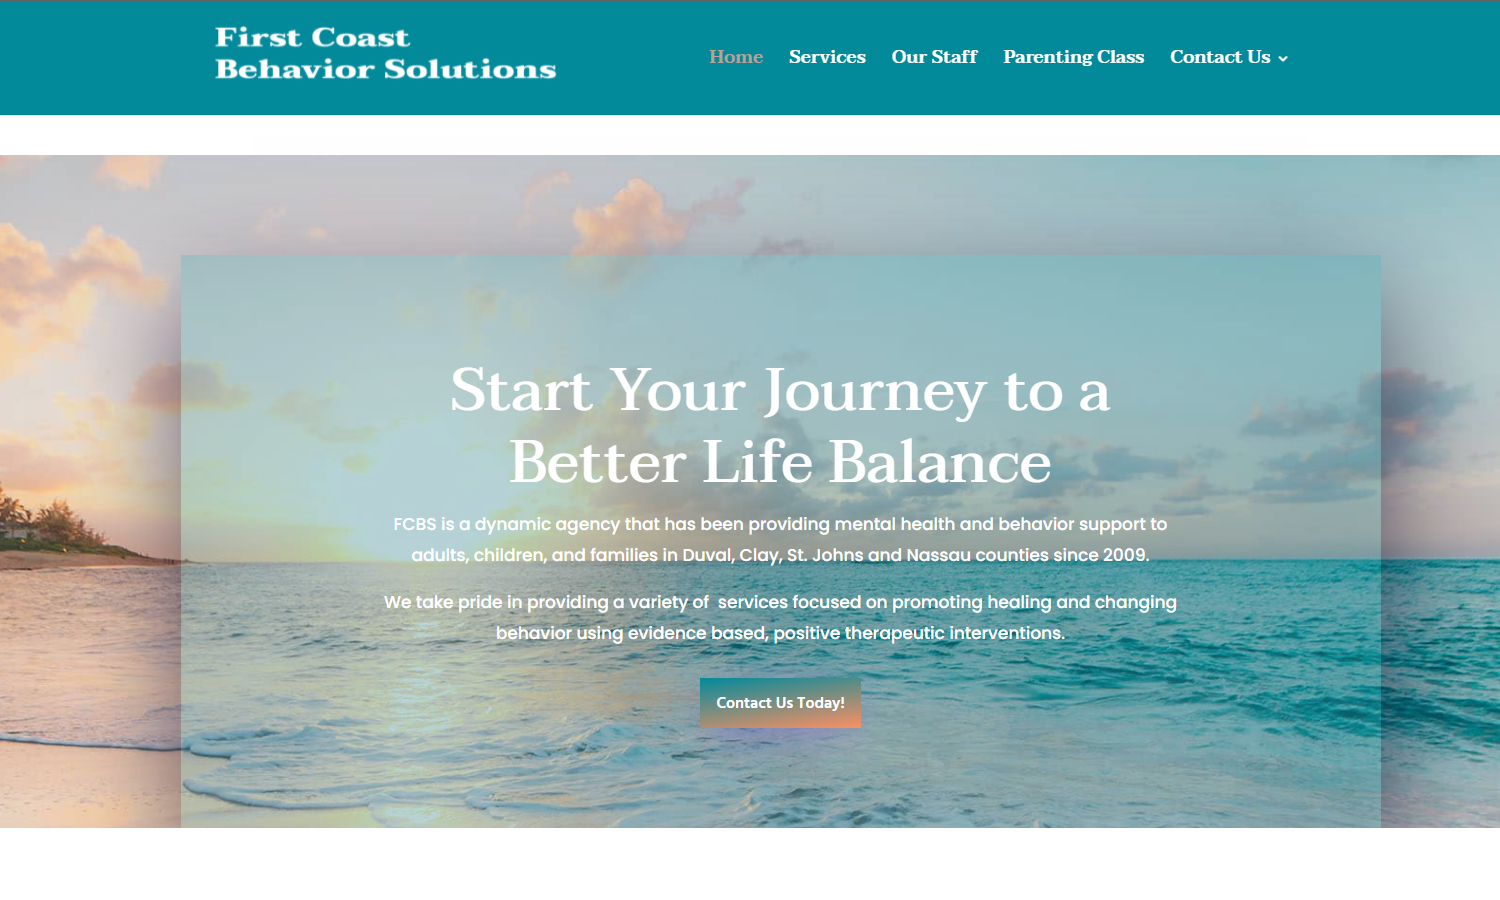 First Coast Behavior Solutions Home Page